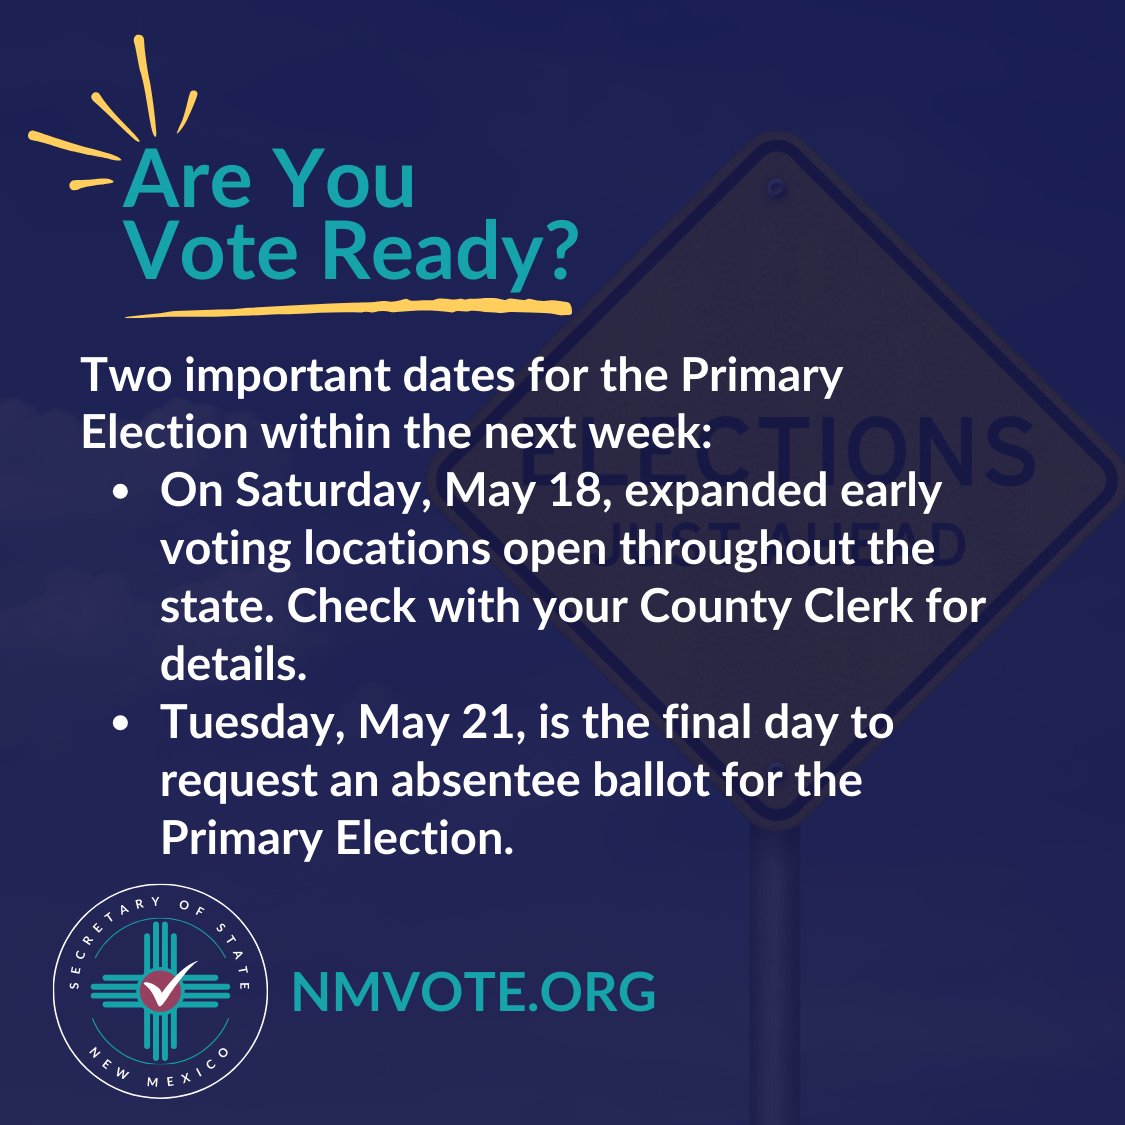 Expanded early voting locations around New Mexico open this Saturday (May 18) and the last day to request an absentee ballot for the Primary Election is next Tuesday (May 21). Get #VoteReady at NMVOTE.ORG